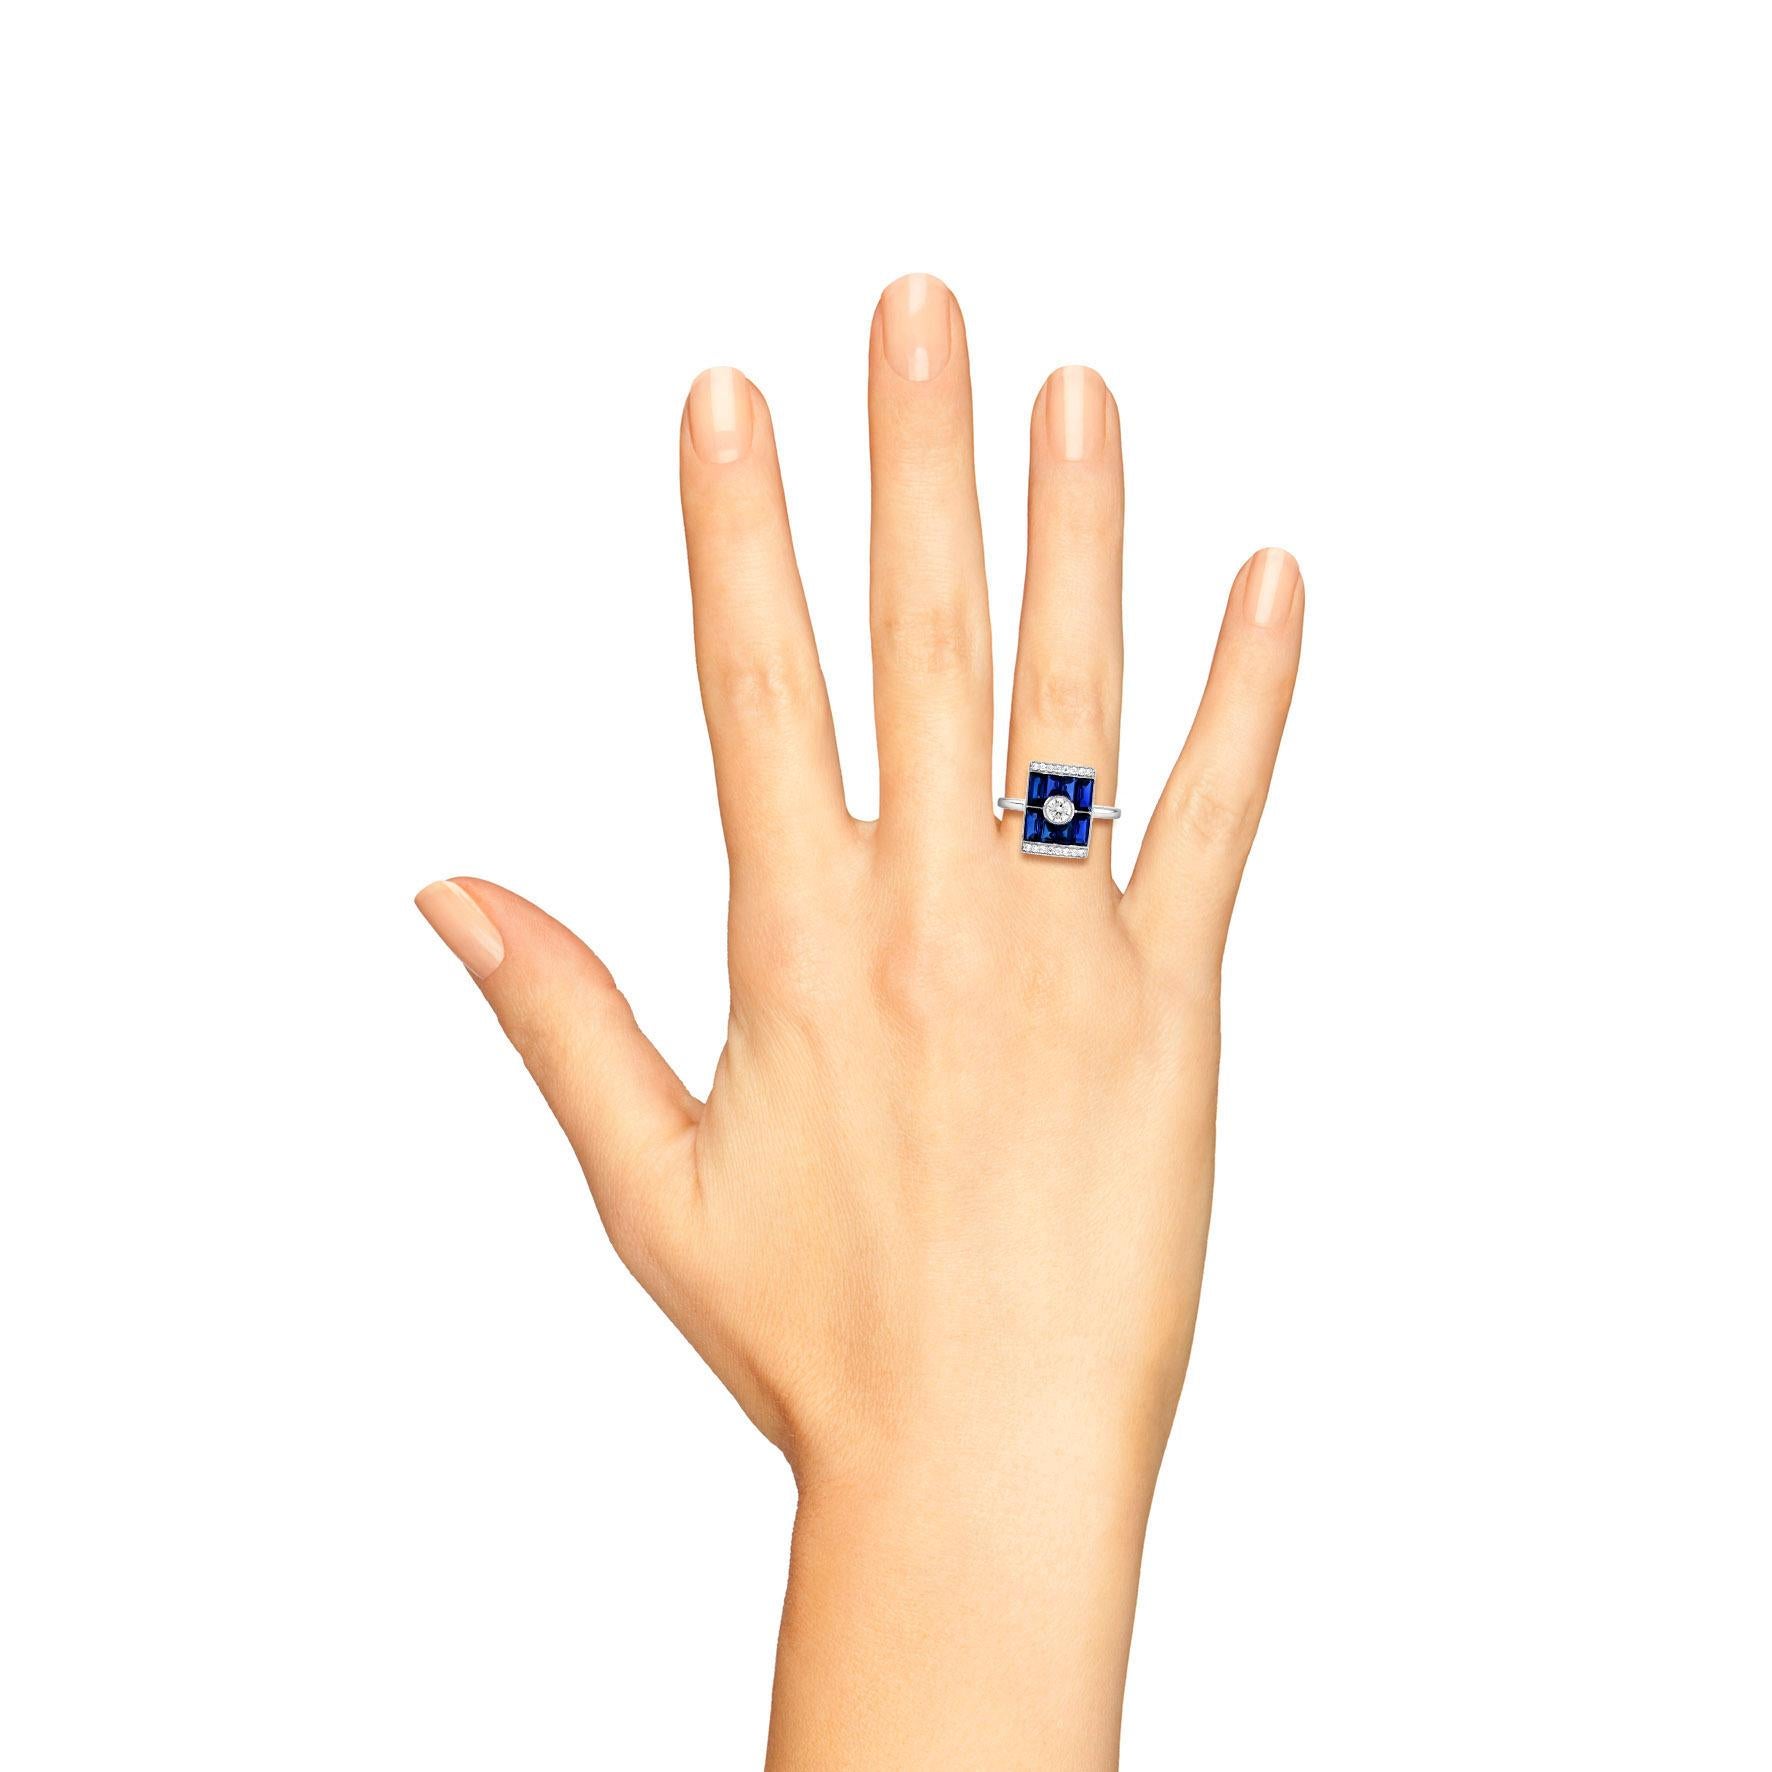 Art Deco design diamond and blue sapphire rectangular target ring in white gold. Centered with an estimated 0.25 carat diamond surrounded by eight calibre cut sapphires in visible settings and flanked with two horizontal rows of diamonds in grain